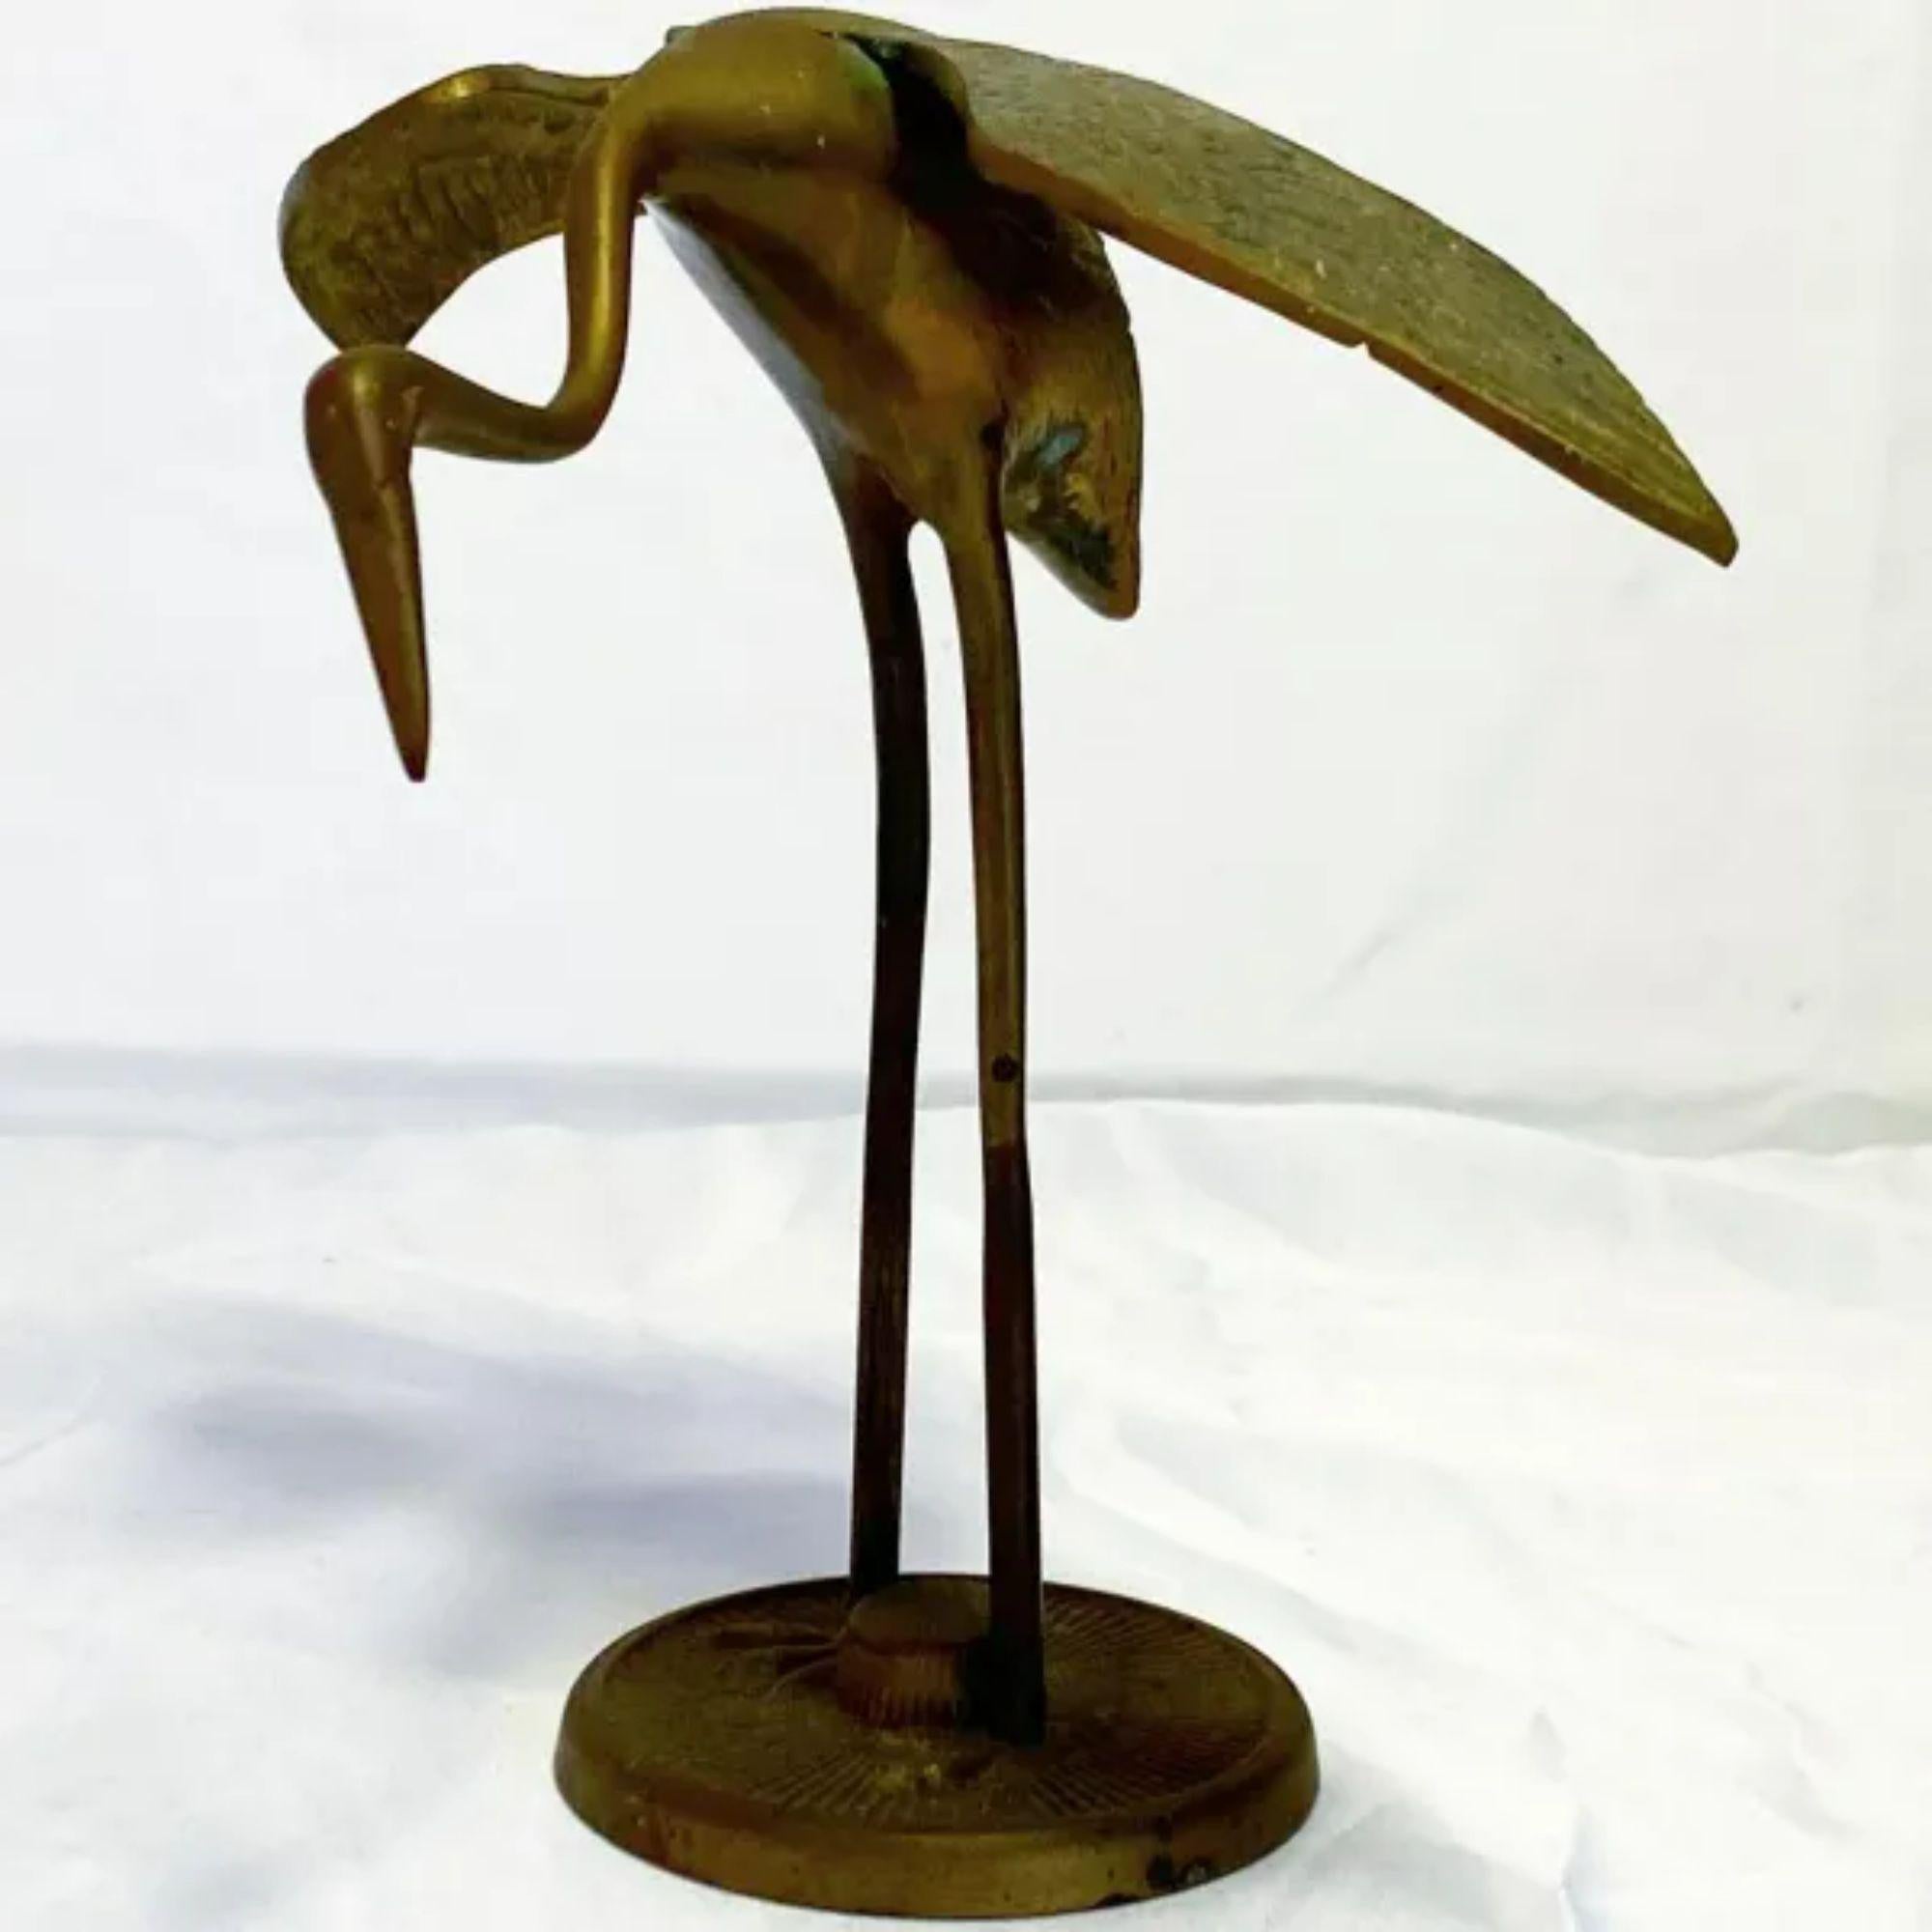 This is a beautiful brass sculpture depicting a heron scoping the ground for food.

Additional information: 
Material: Brass
Color: Brass
Style: Mid-Century, Mid-Century Modern, Vintage
Time Period: 1960s
Dimension: 8” L x 6” D x 7.5” H.